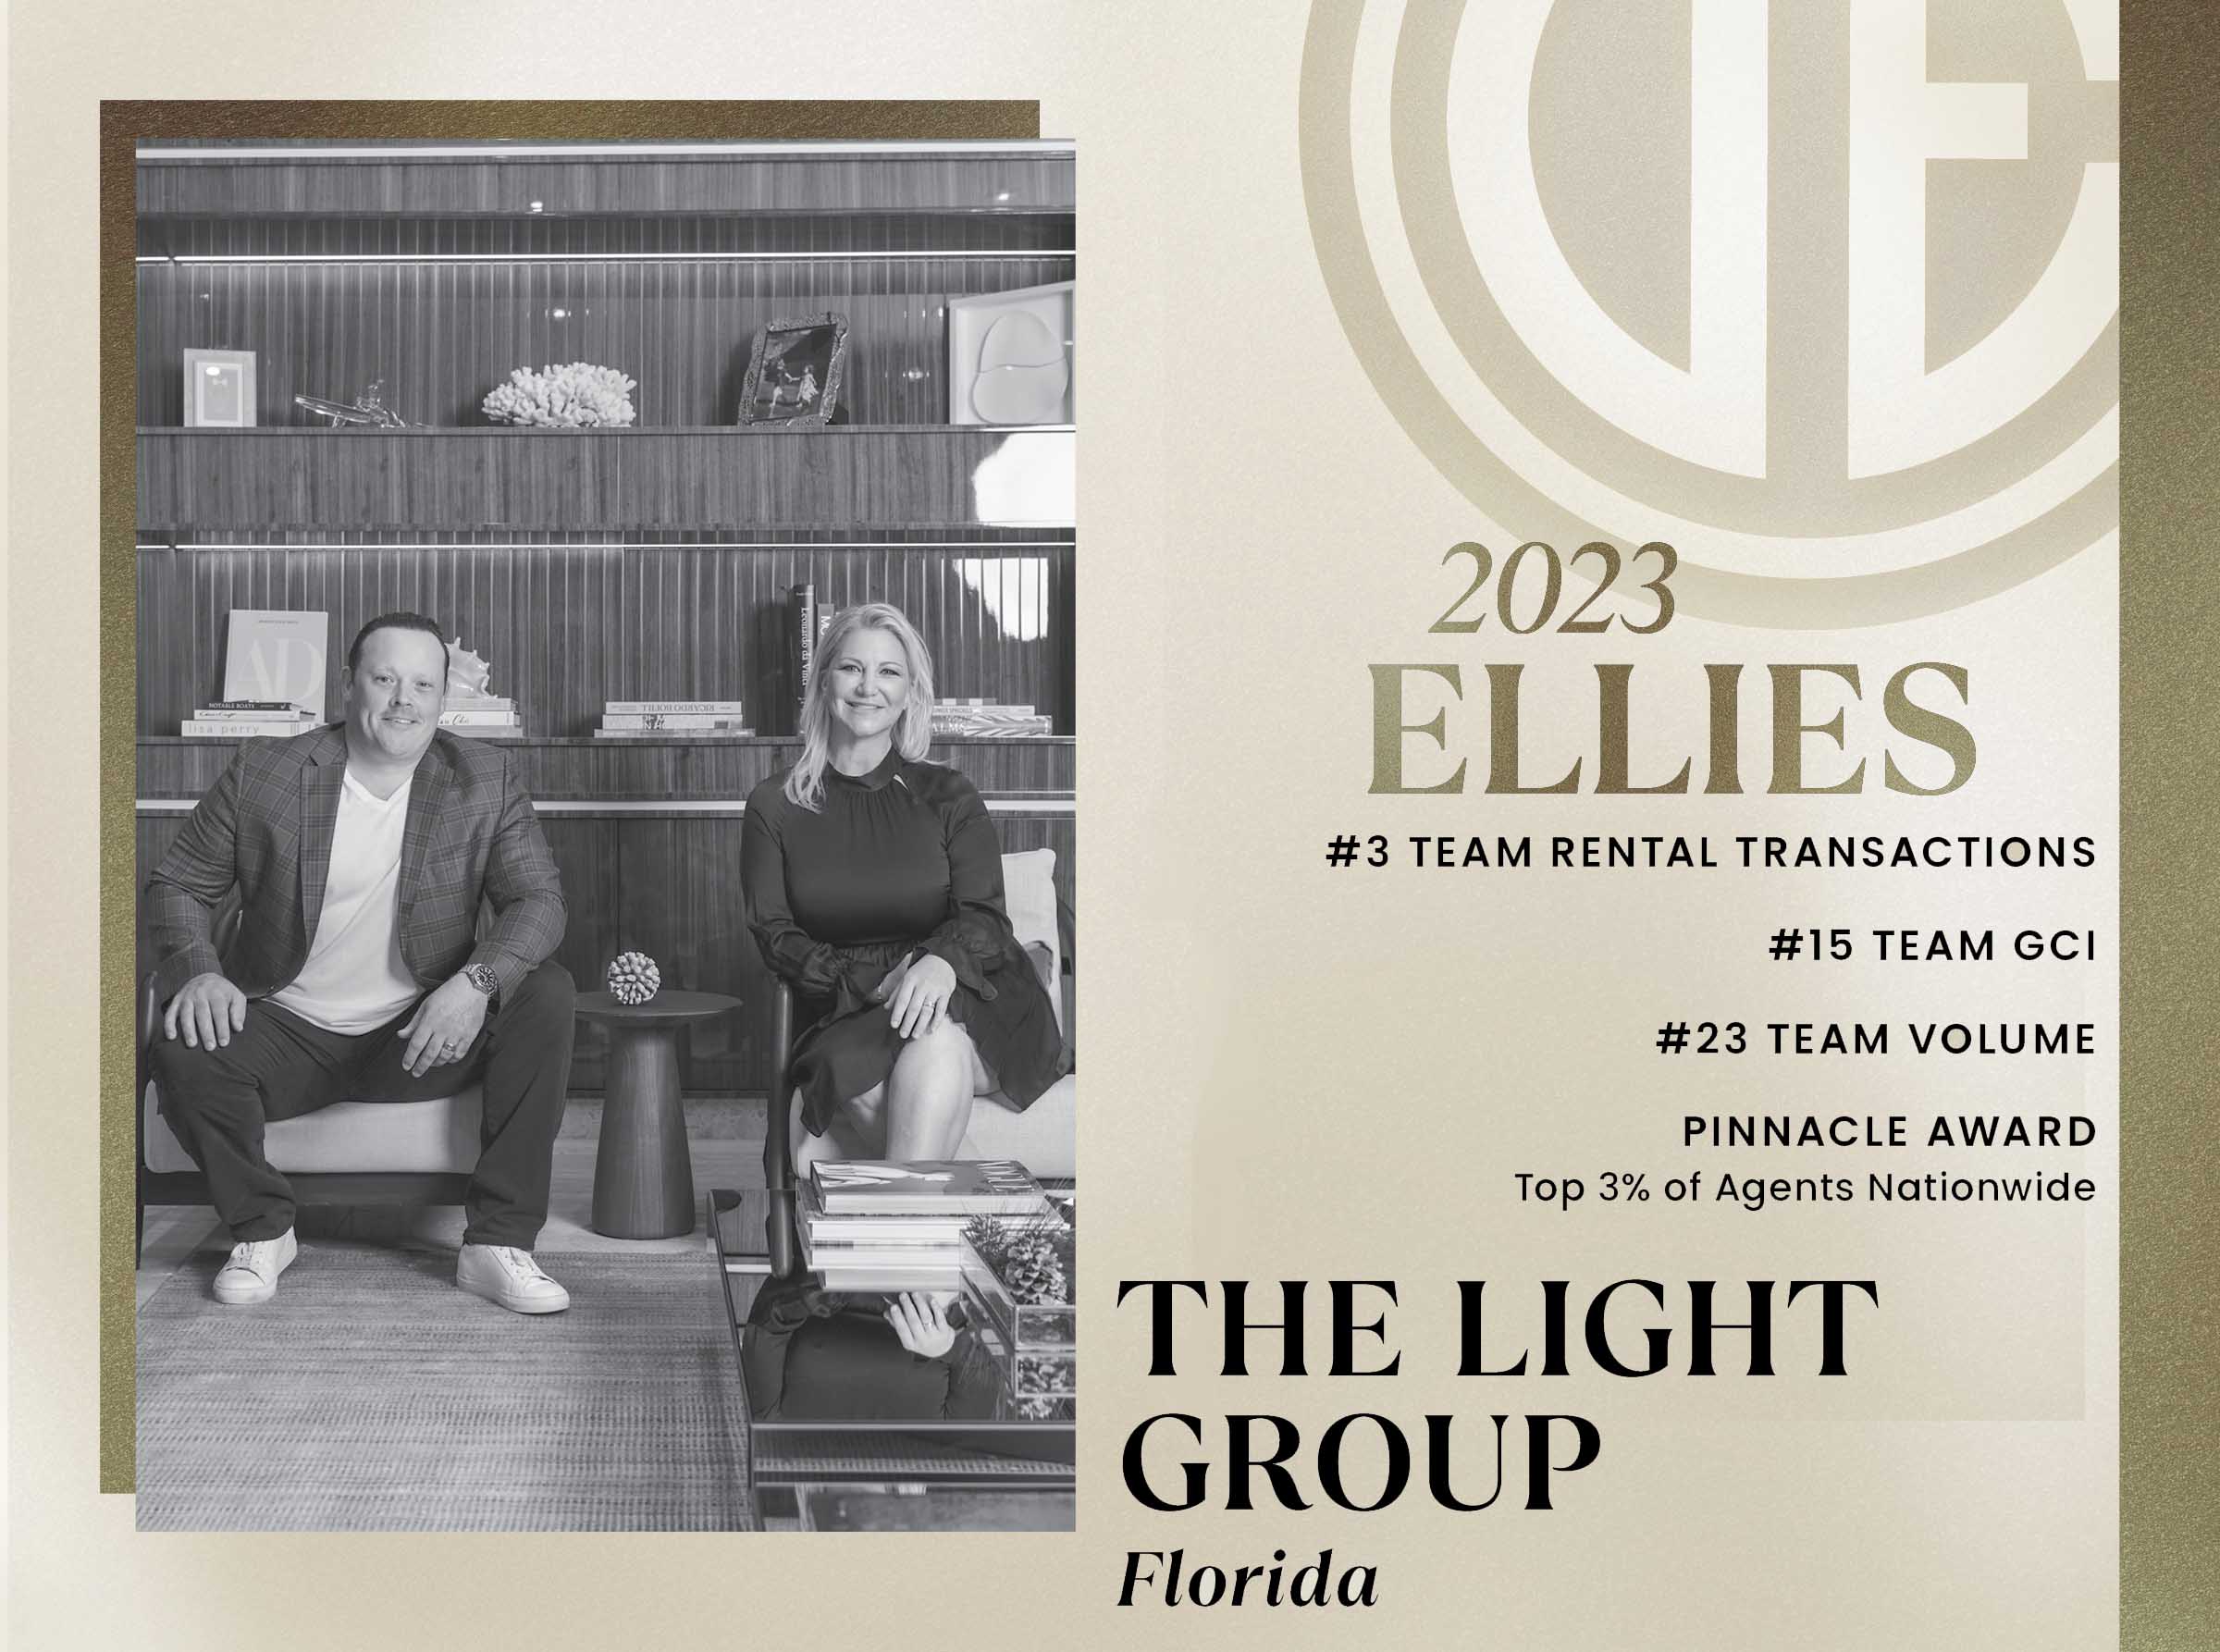 The Light Group Is Honored With Pinnacle Award At 2023 Ellies